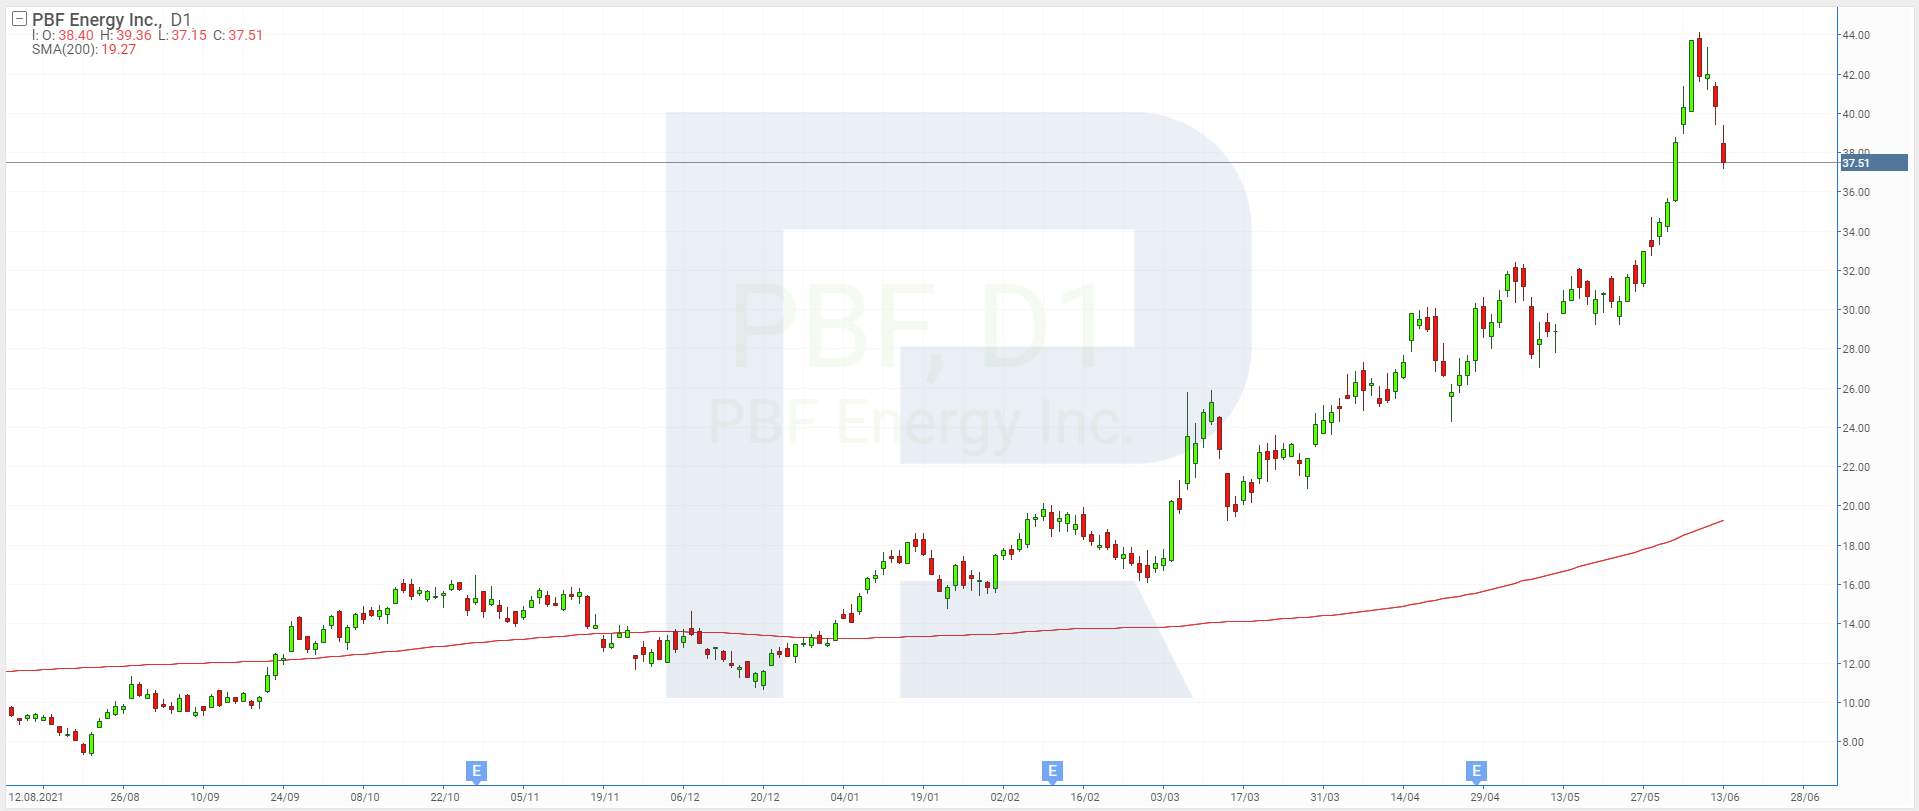 Share price chart of PBF Energy